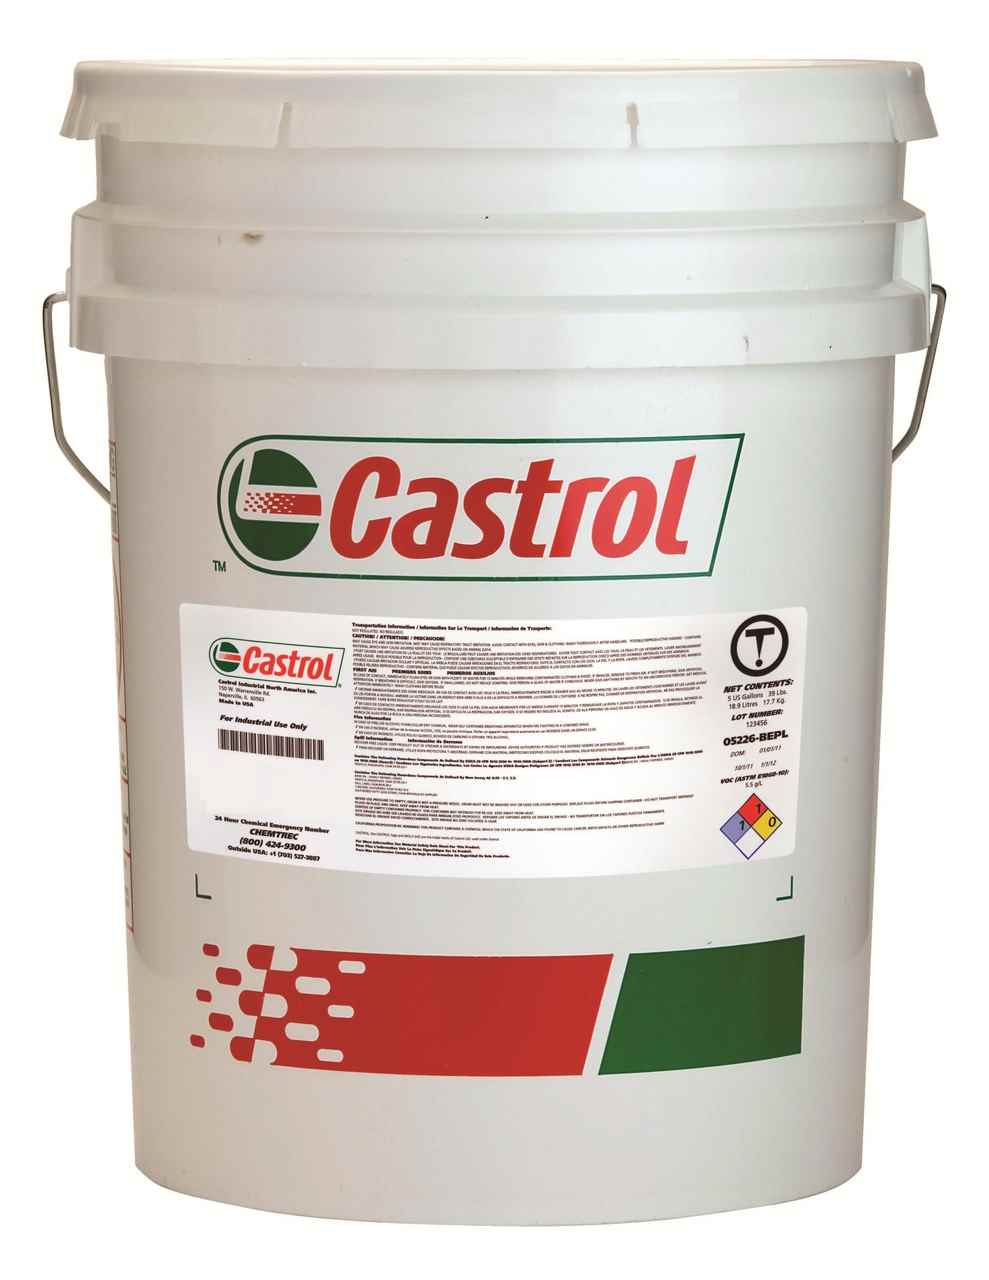 CASTROL AIRCOL 2284 SYNTHETIC COMPRESSOR LUBRICANT 20 LITERS